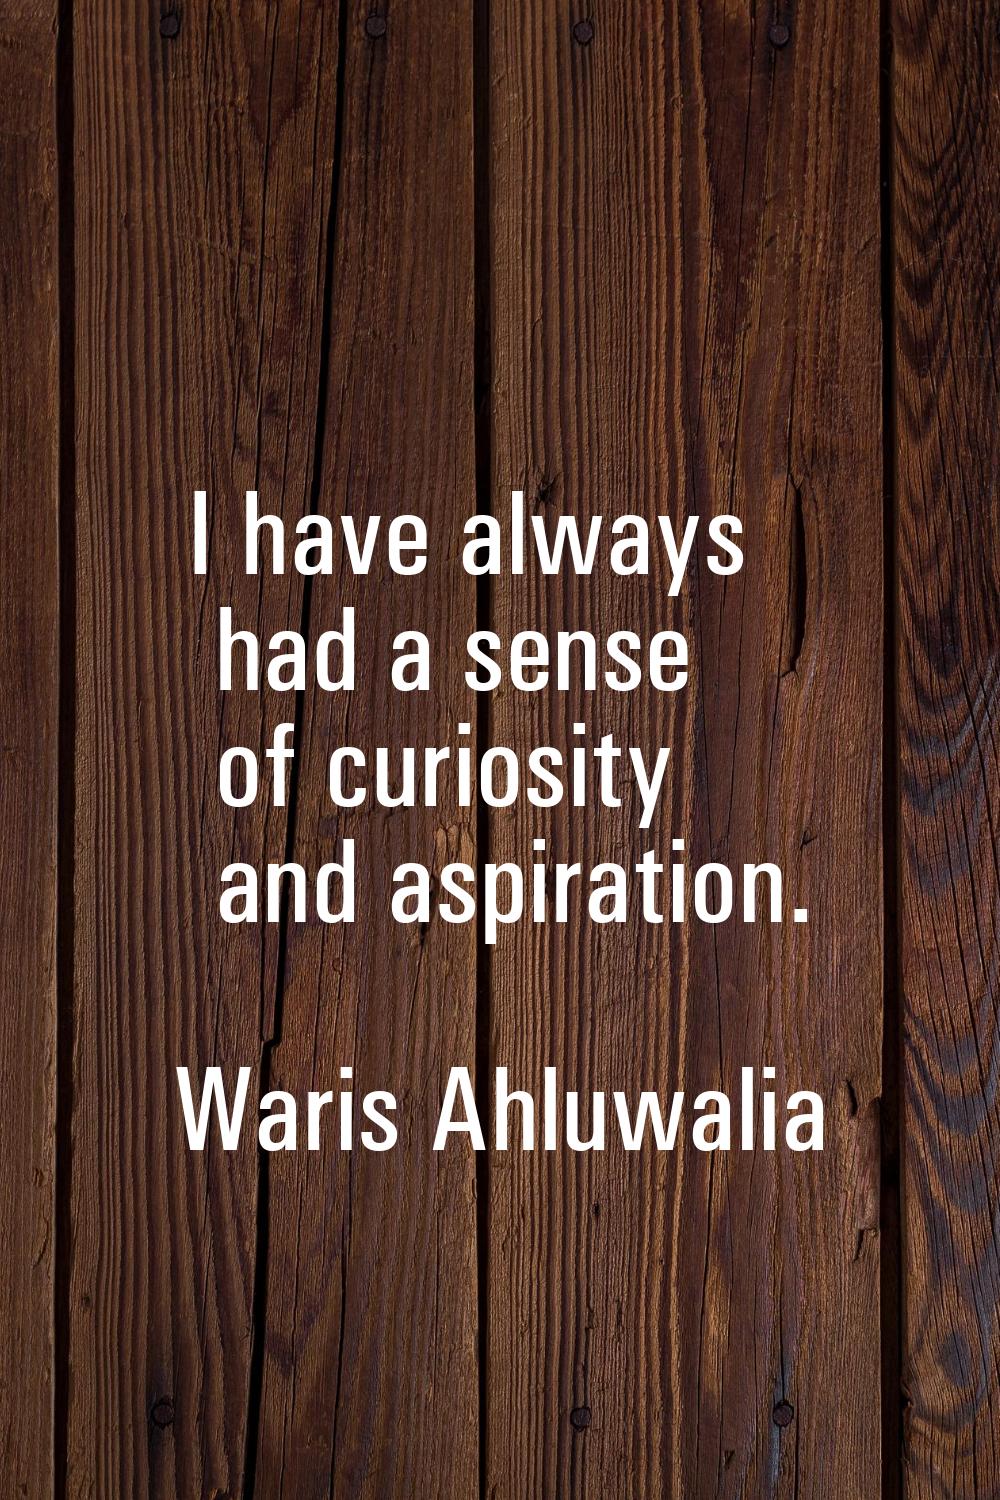 I have always had a sense of curiosity and aspiration.